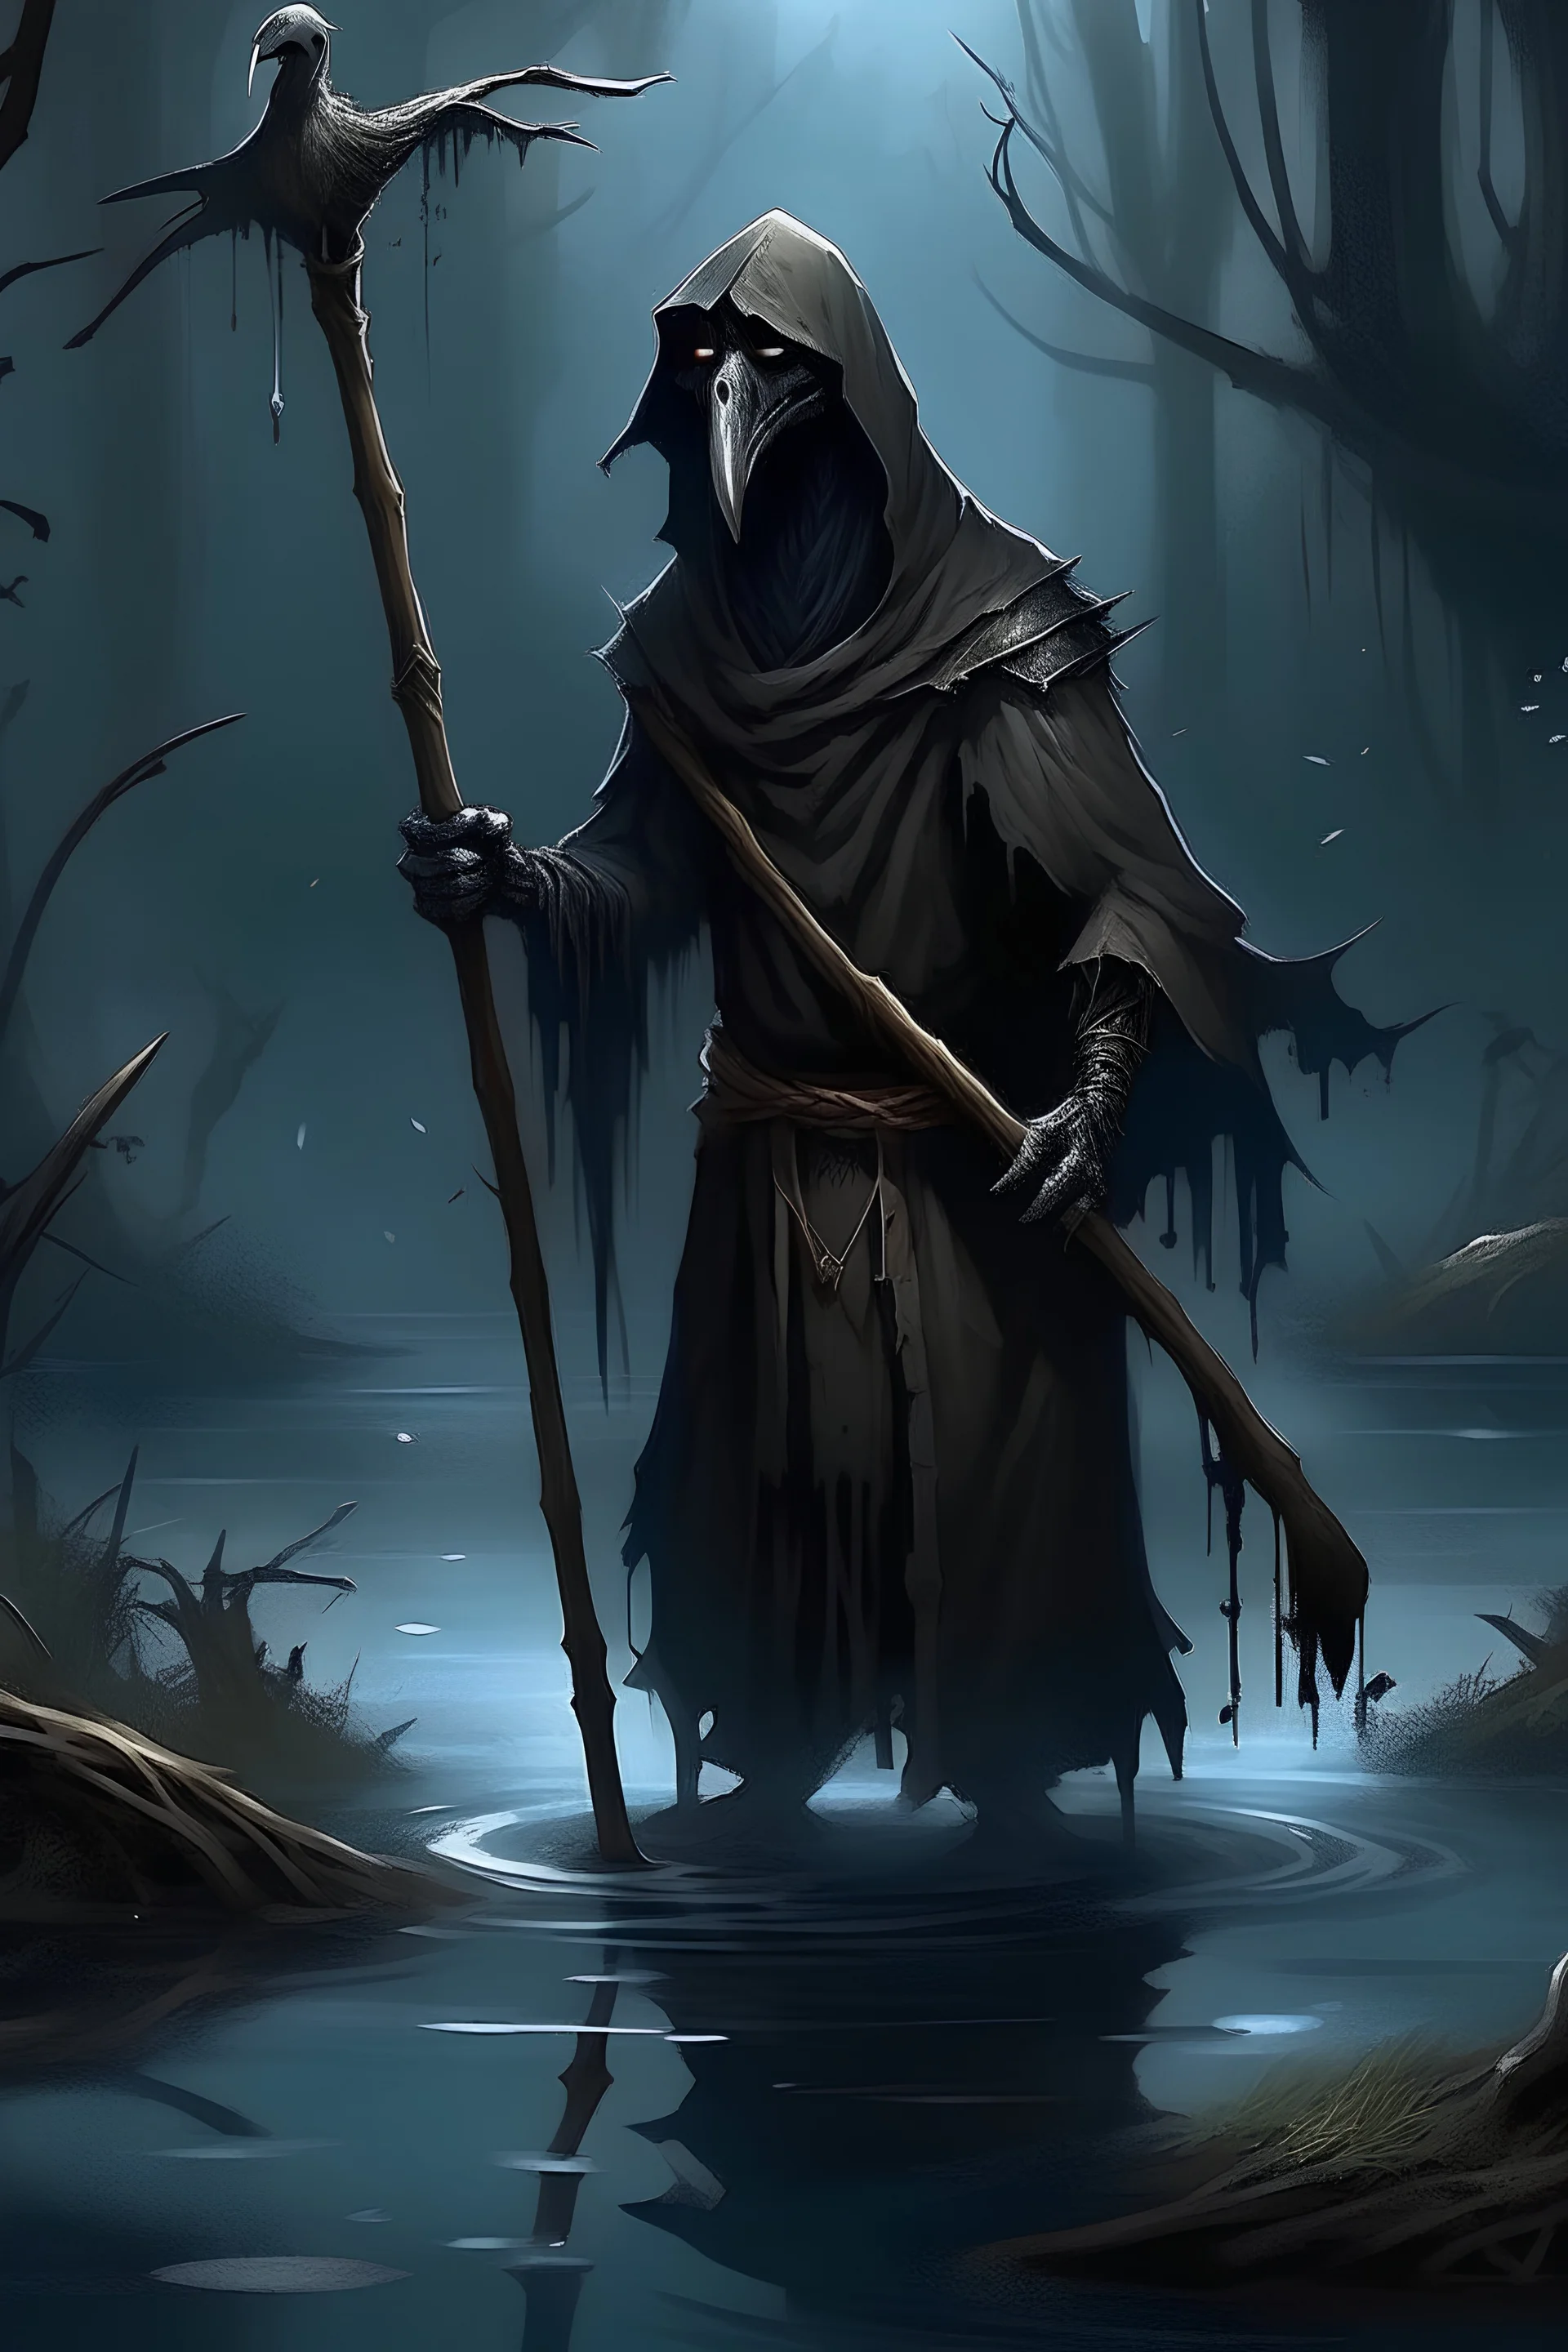 Young Kenku necromancer pirate with black robes and a crooked wooden staff in a dark swamp